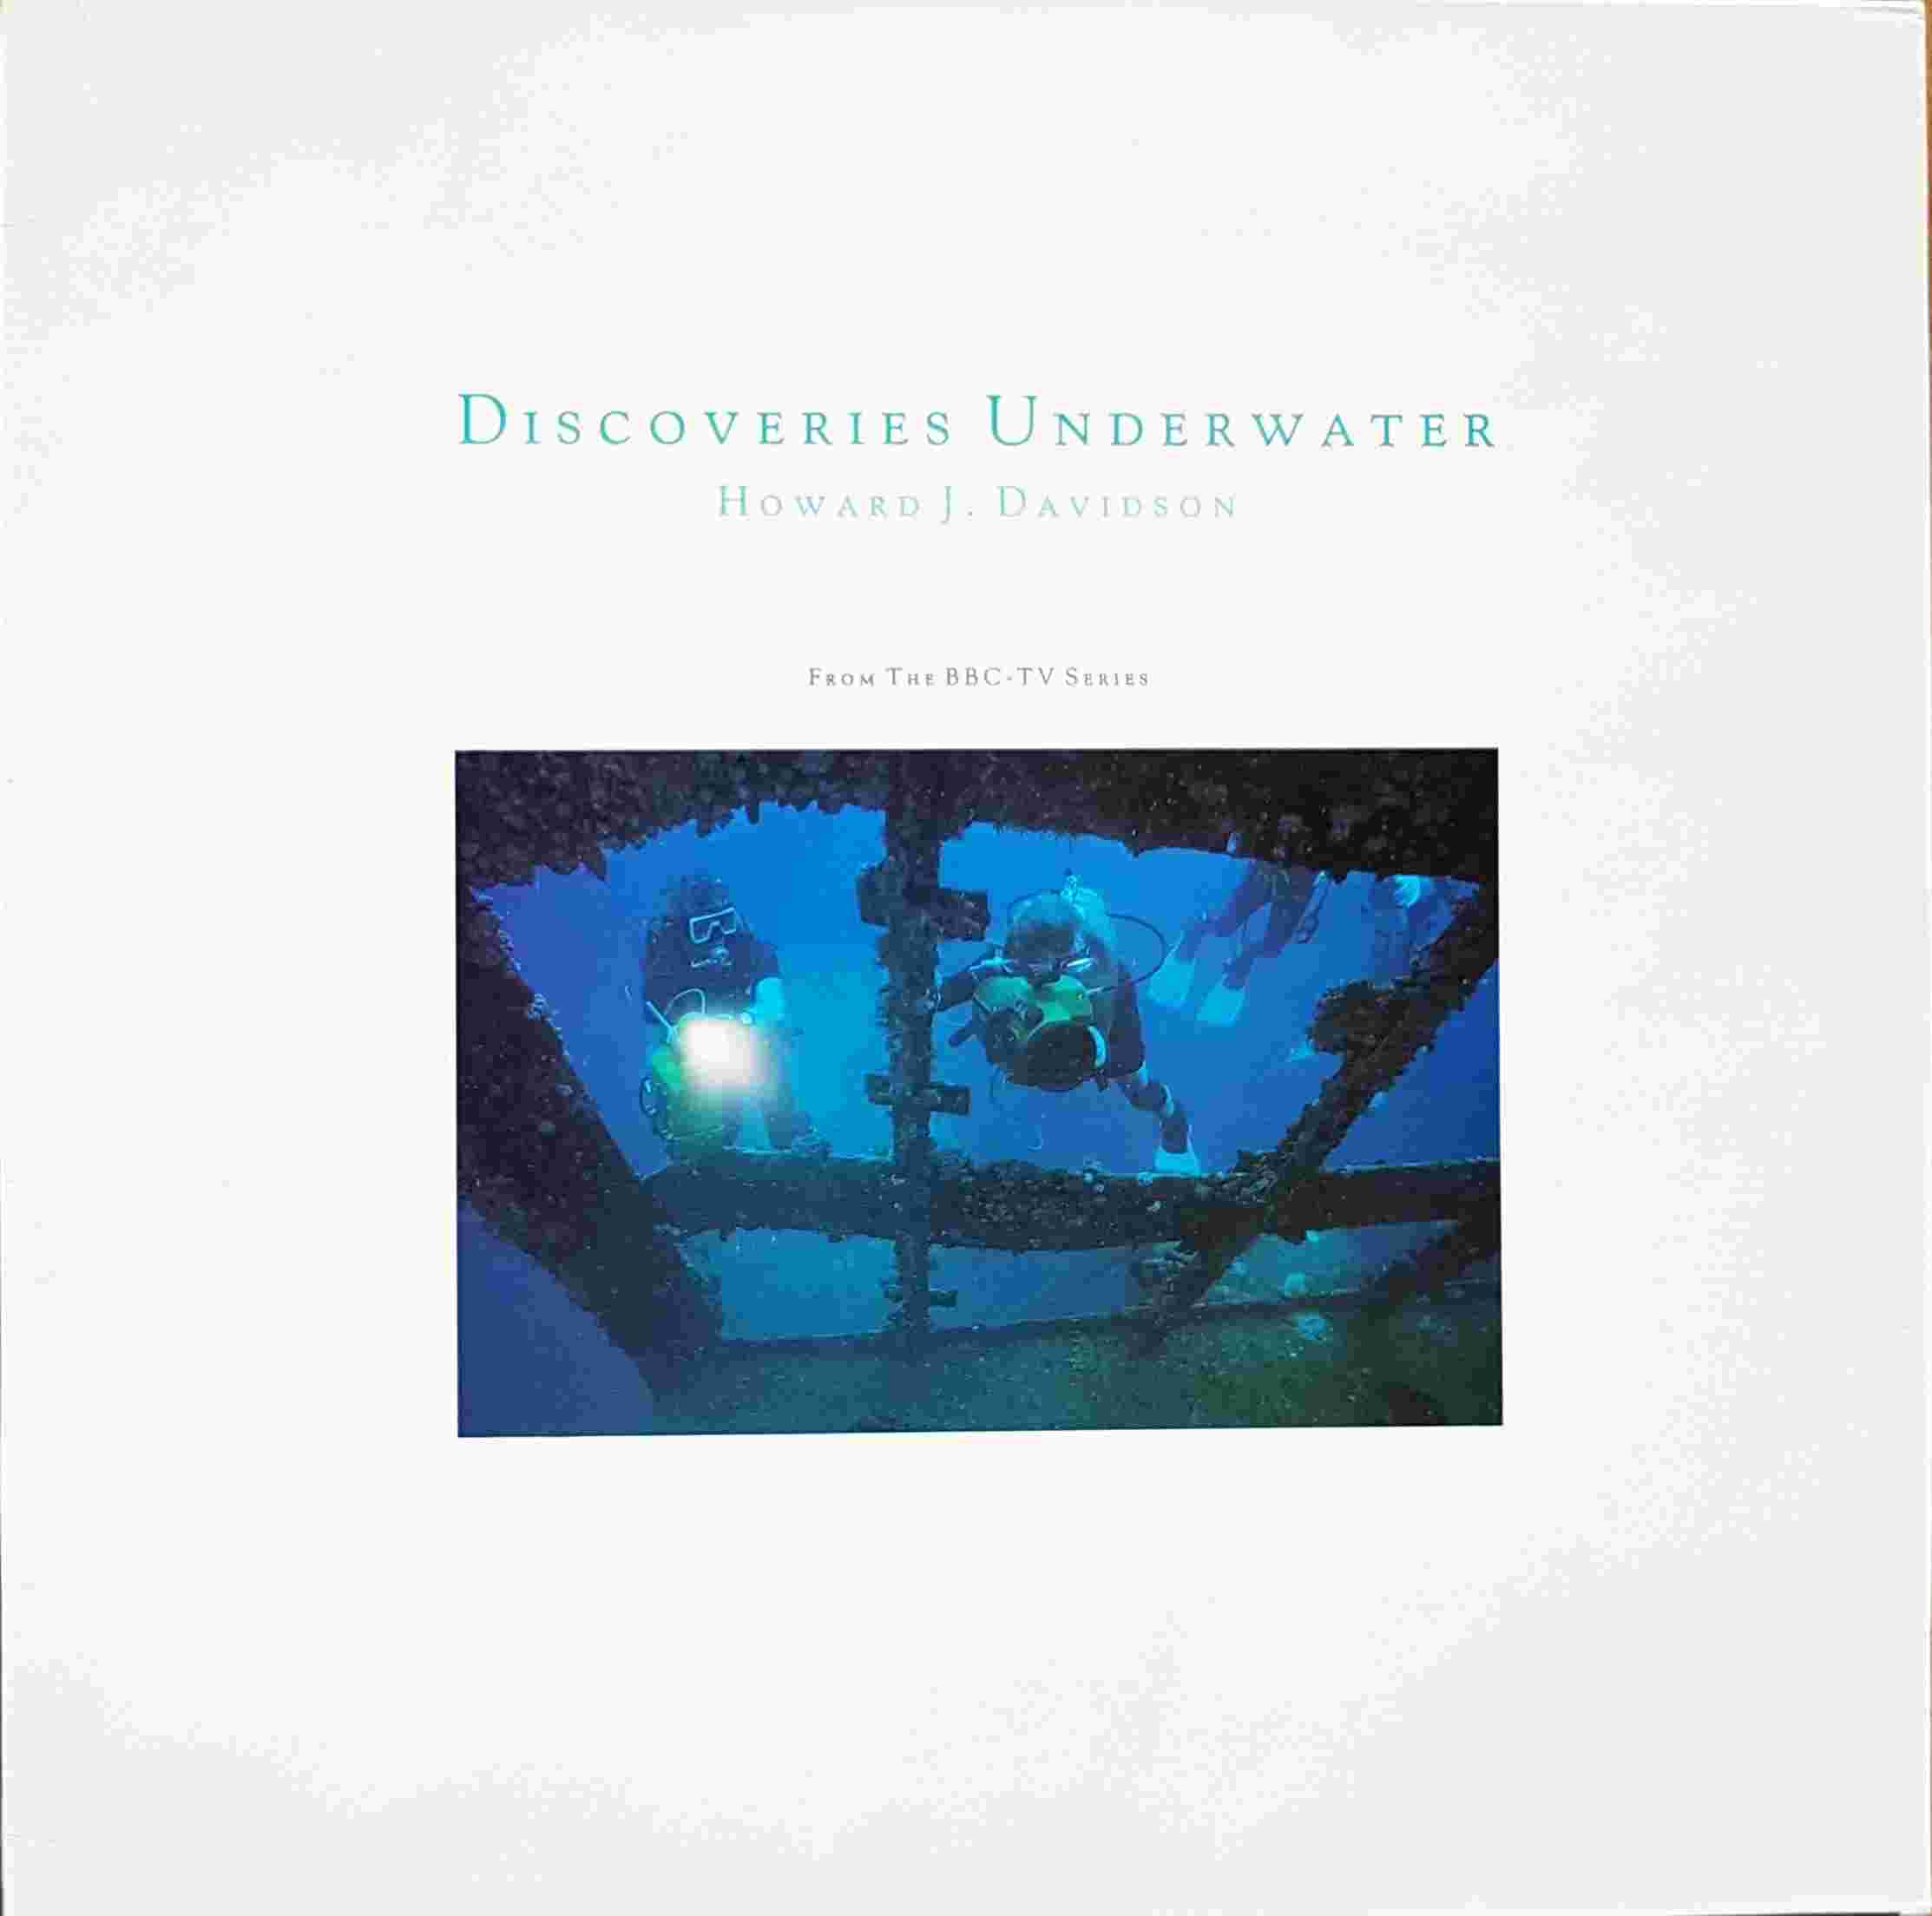 Picture of REB 677 Discoveries underwater by artist Howard J. Davidson from the BBC albums - Records and Tapes library